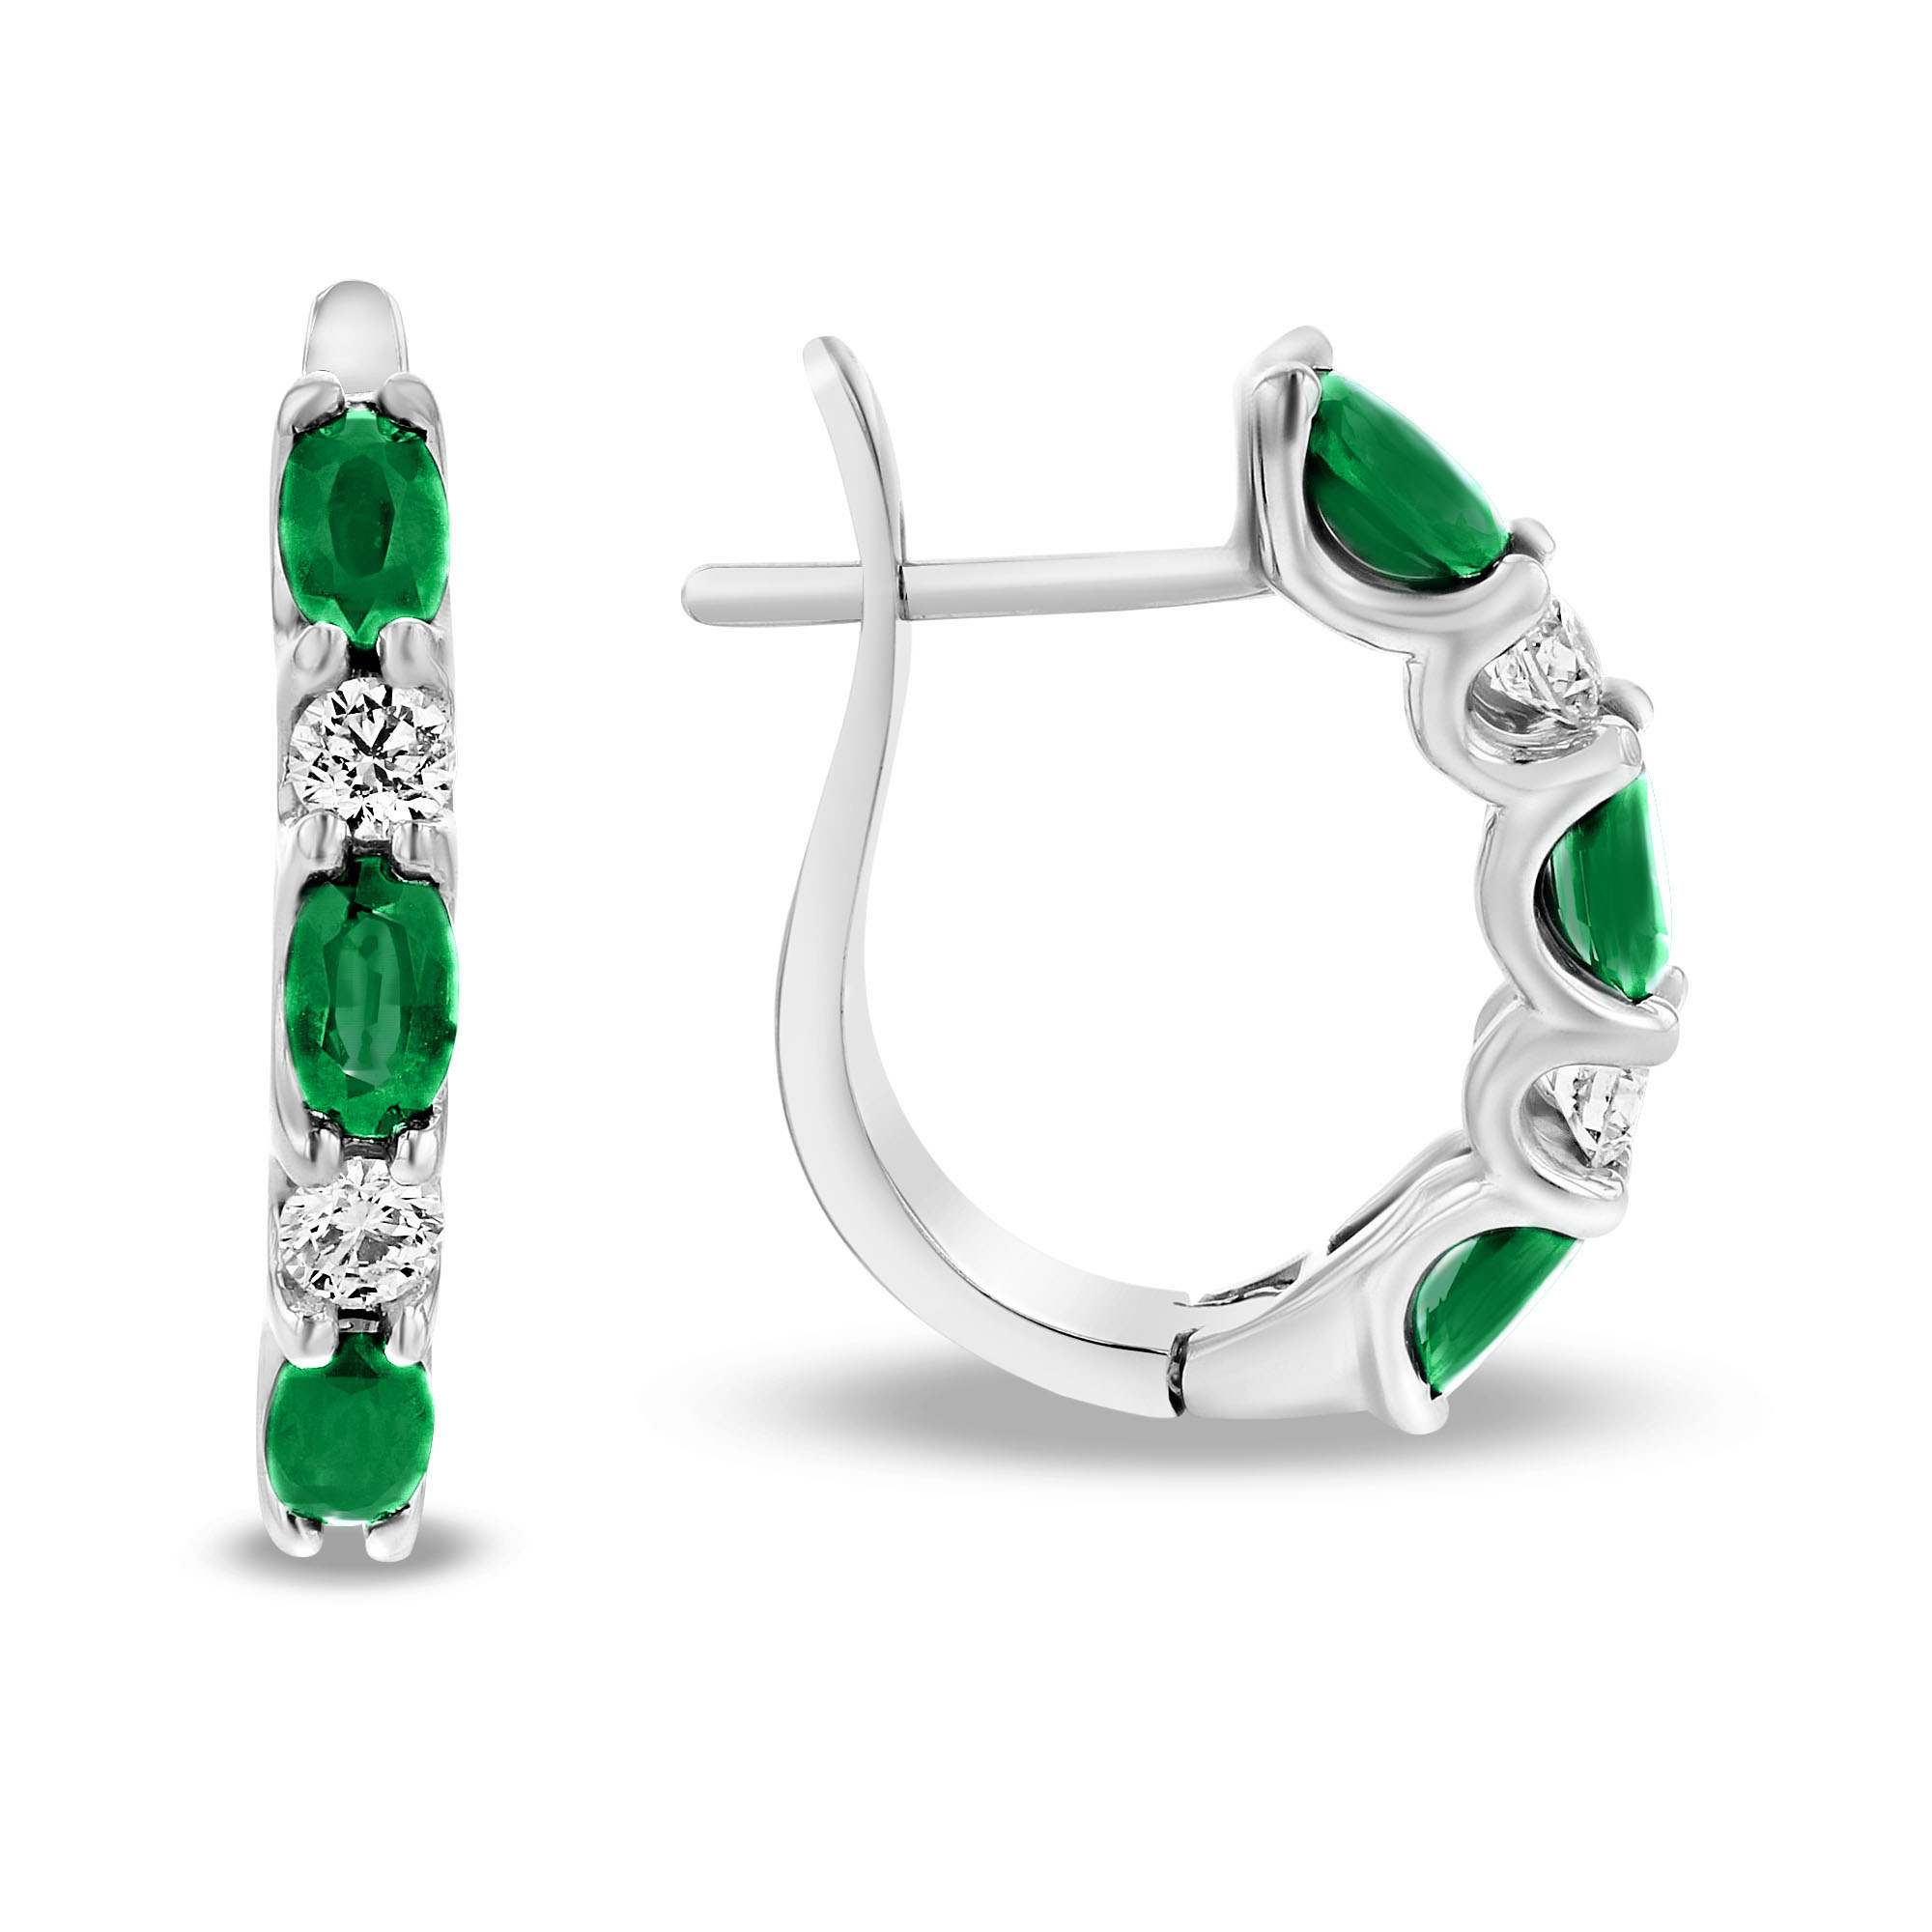 View 2.00ctw Diamond and Emerald Hoop Earrings in 14k White Gold